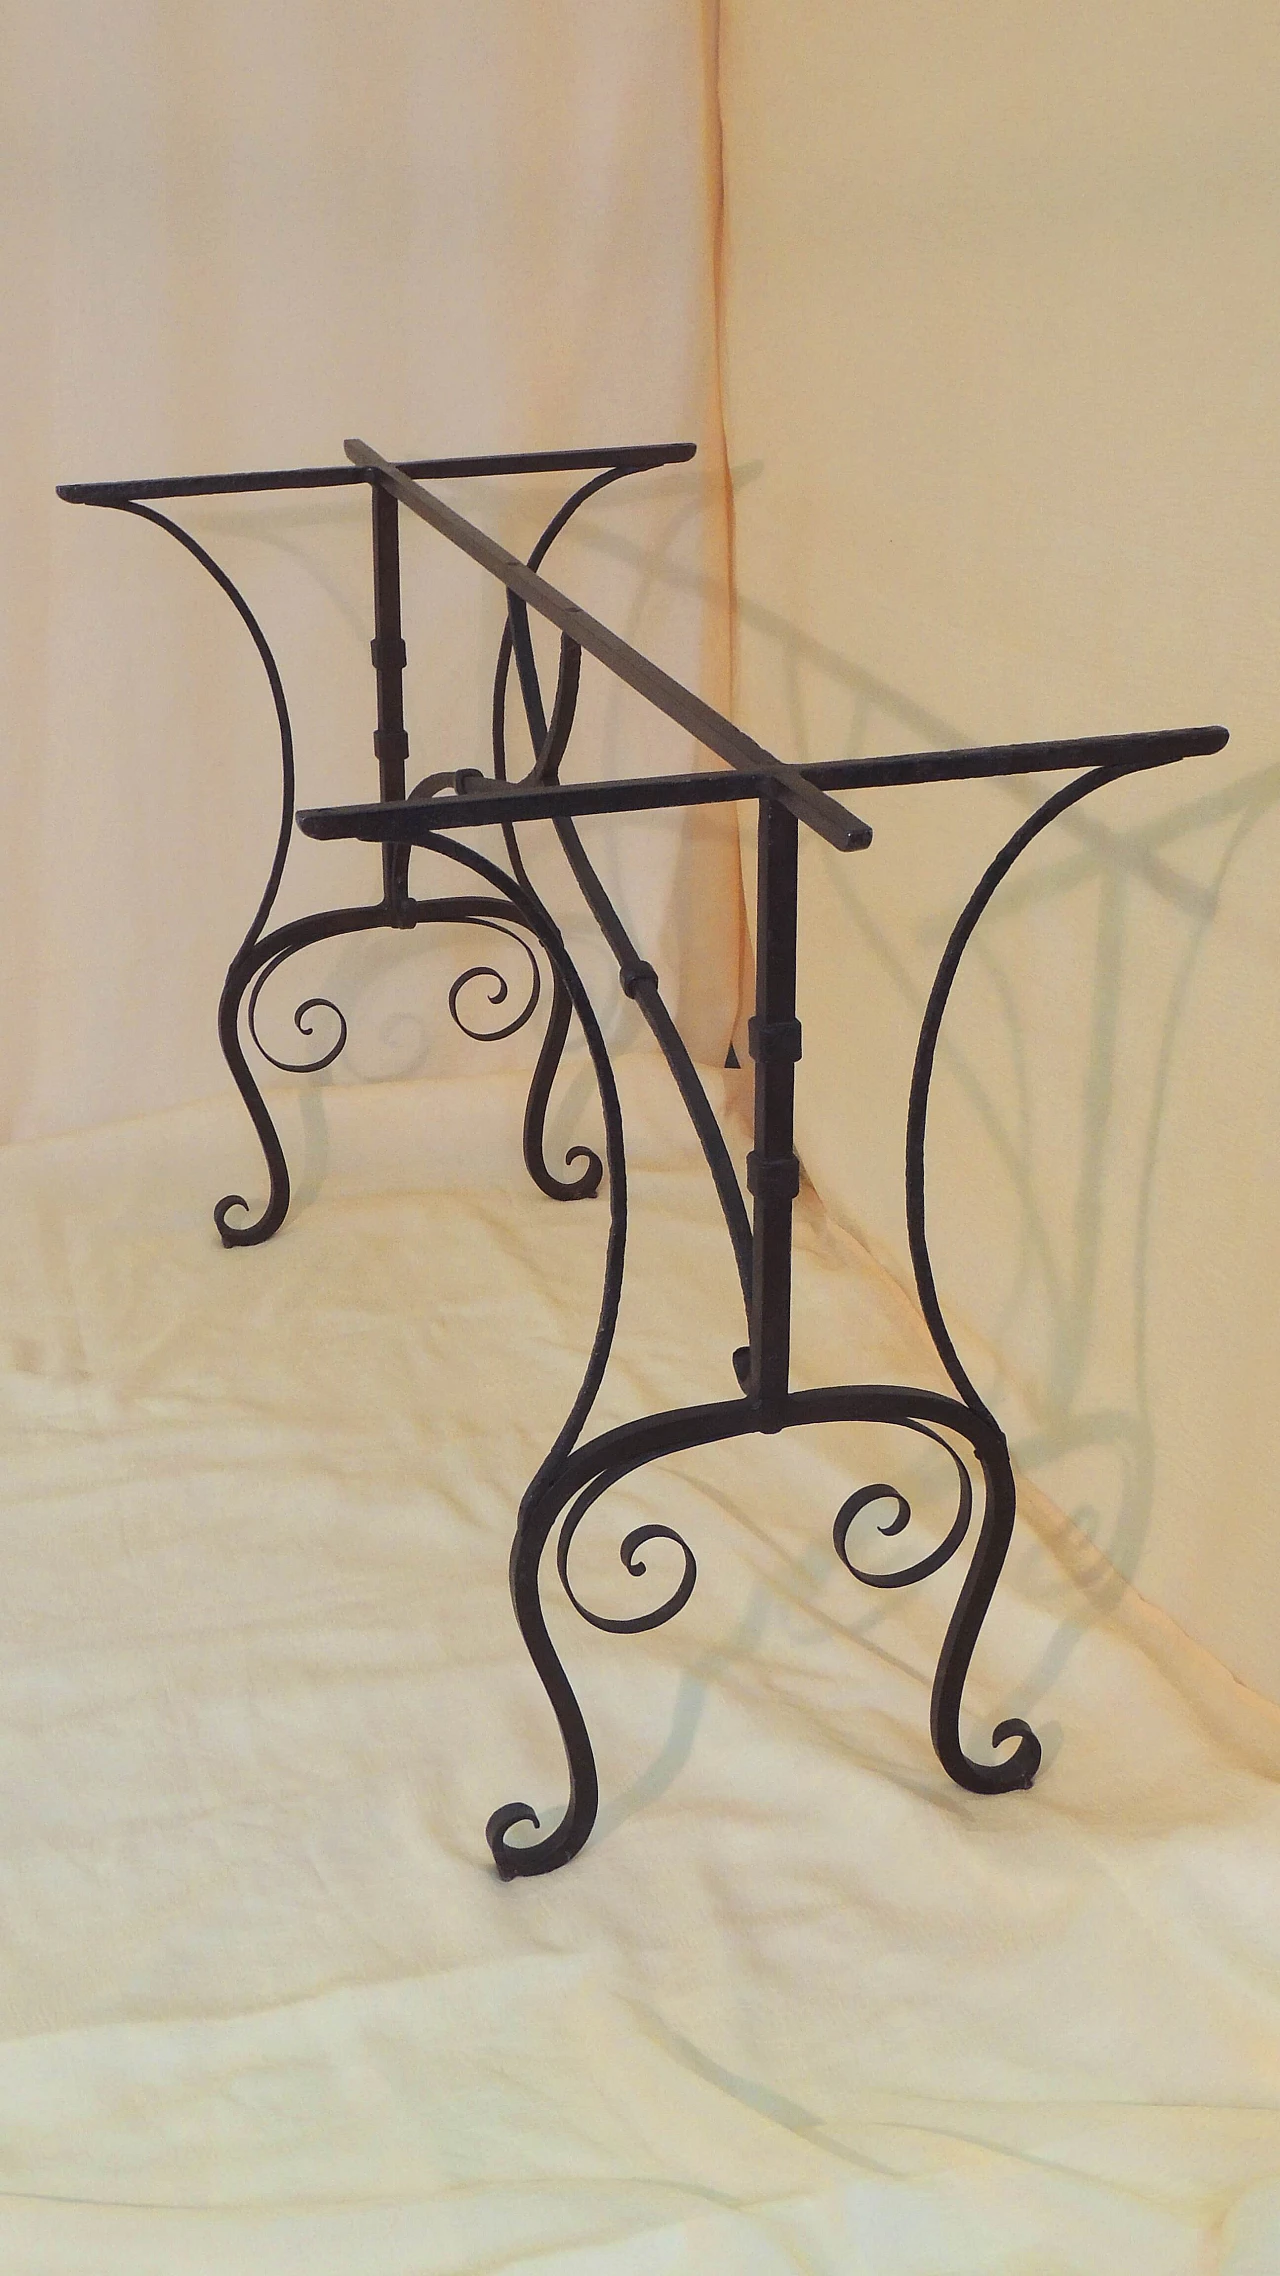 Wrought iron table created with litter tray 1089535